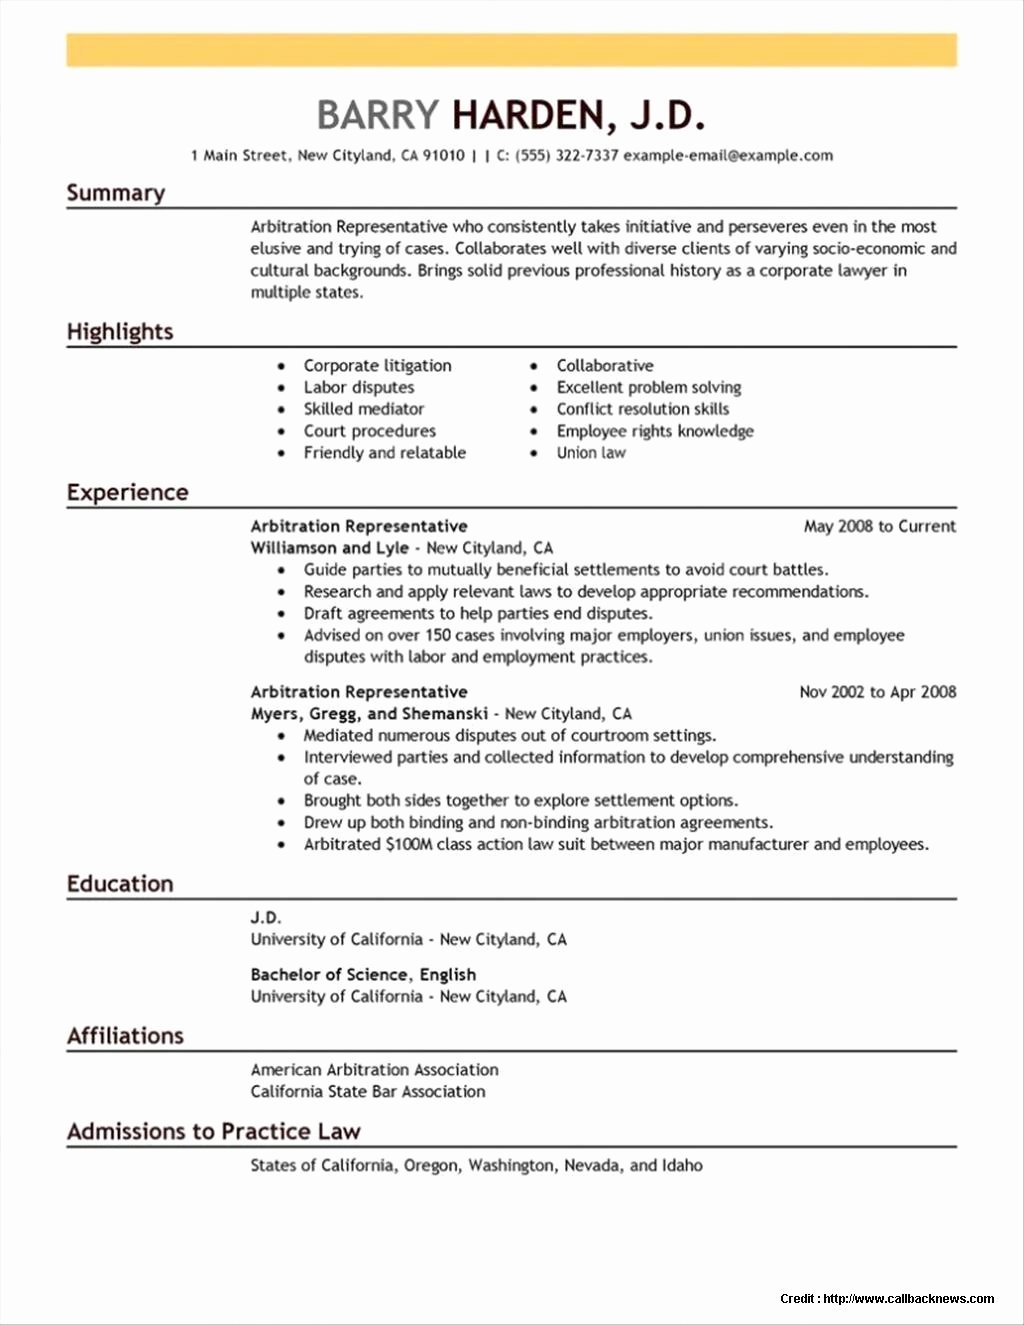 My Perfect Resume Cover Letter Cover Letter Resume